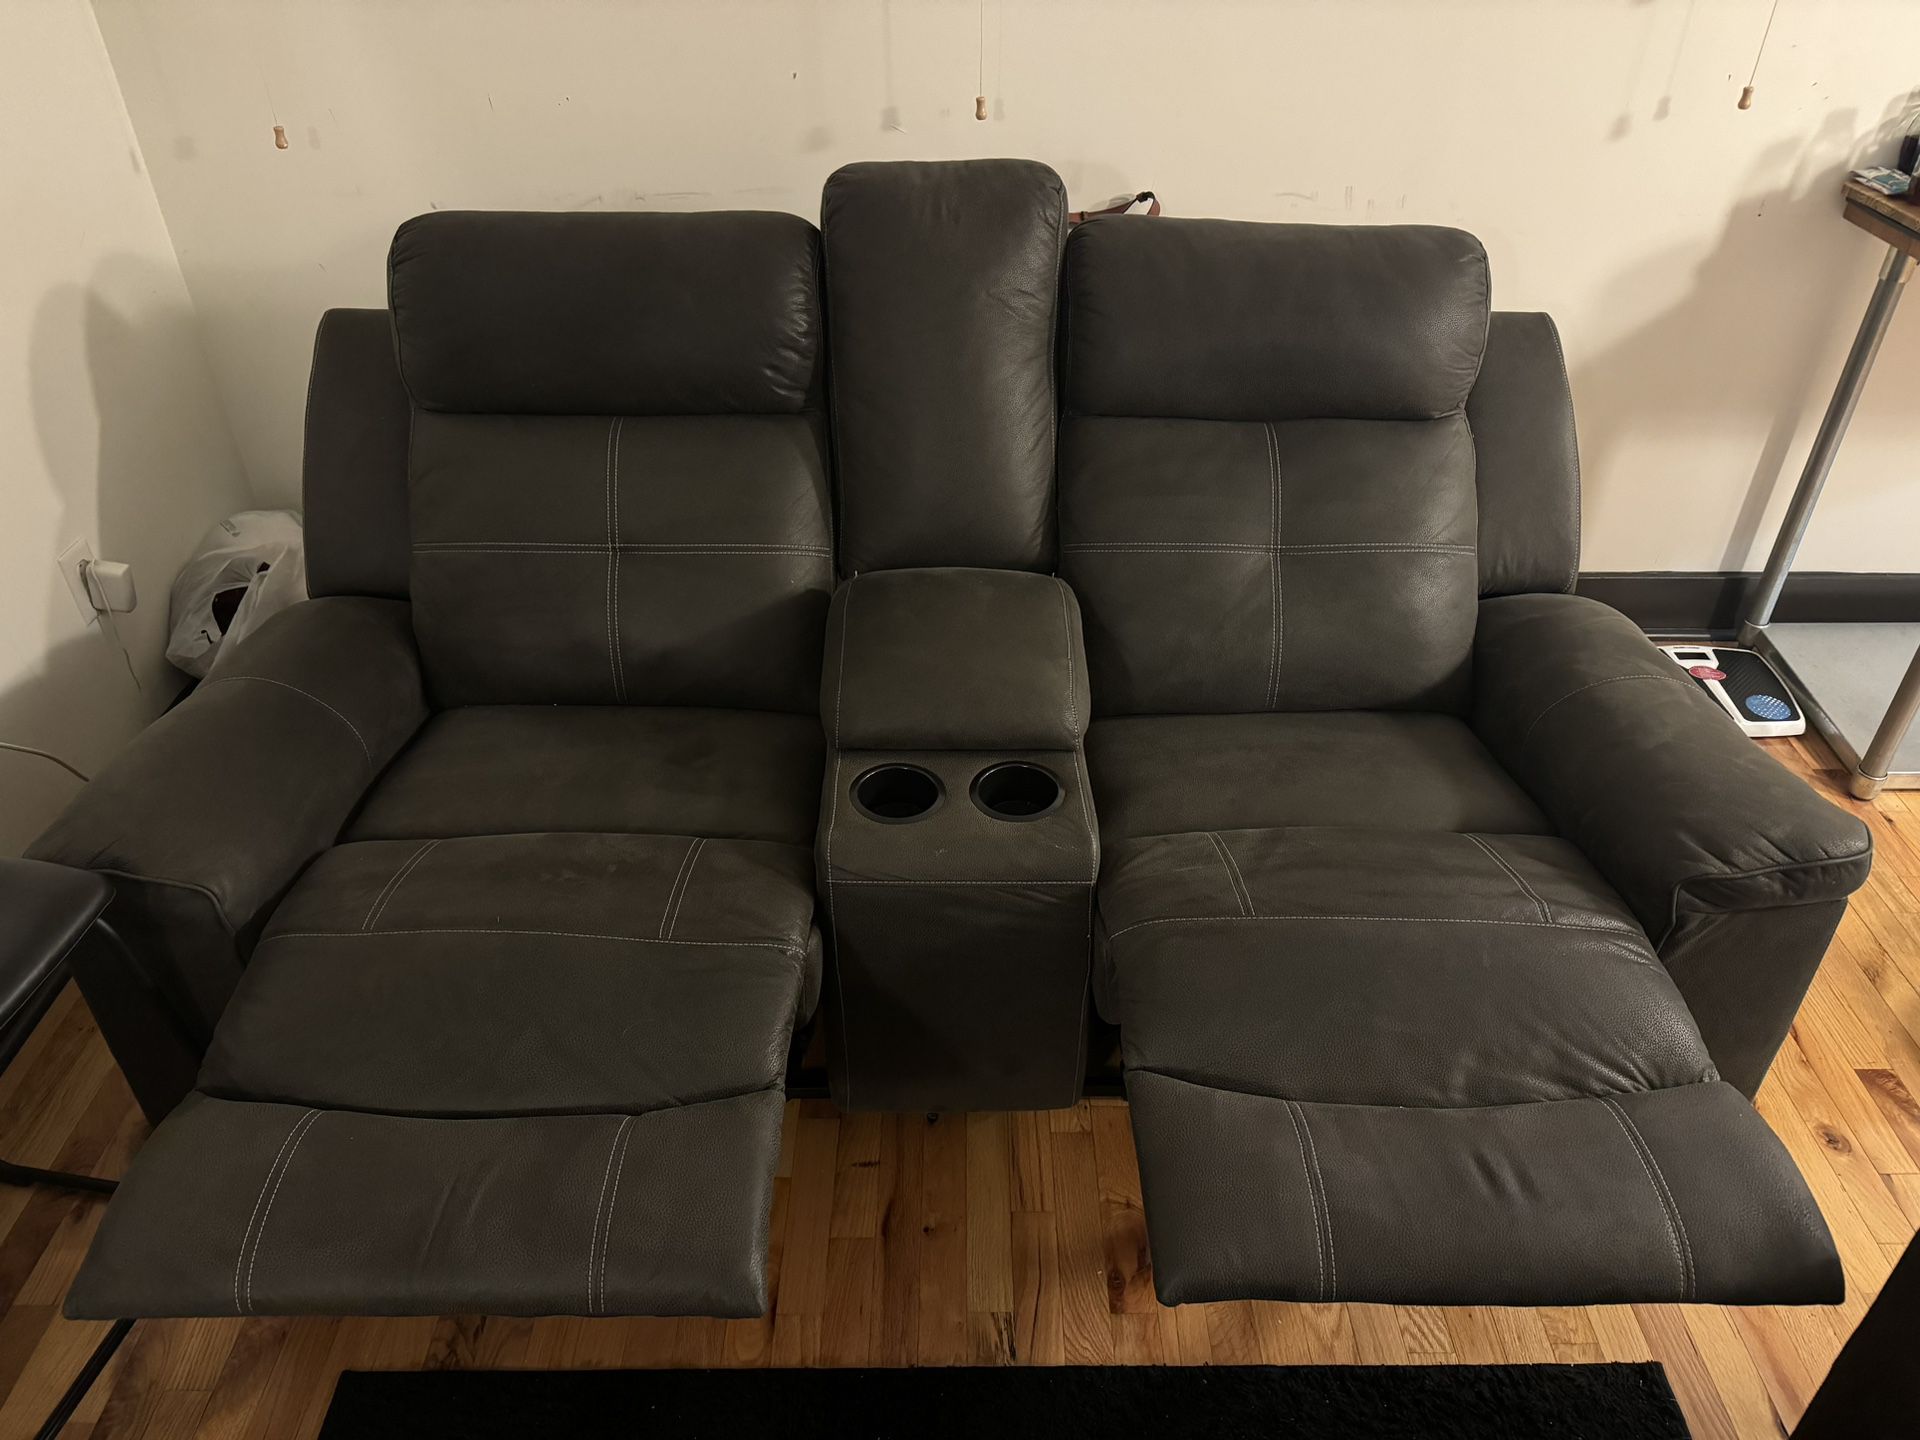 Excellent Condition 2 Pc Sofa Steal! 